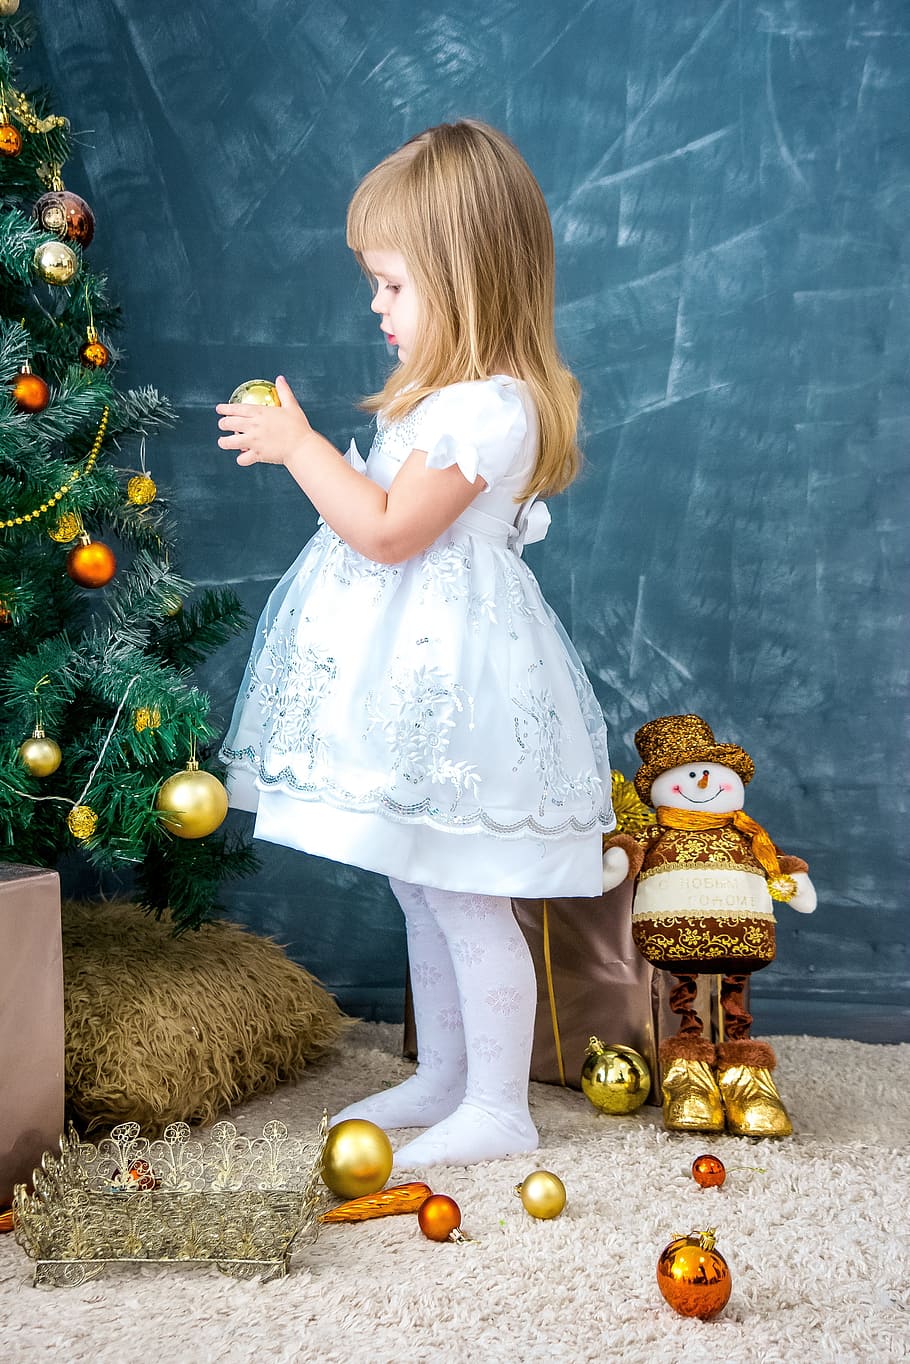 girl, white, light-blue, dress, holding, gold-colored christmas bauble, new year's eve, christmas background, holiday, girl decorates the christmas tree